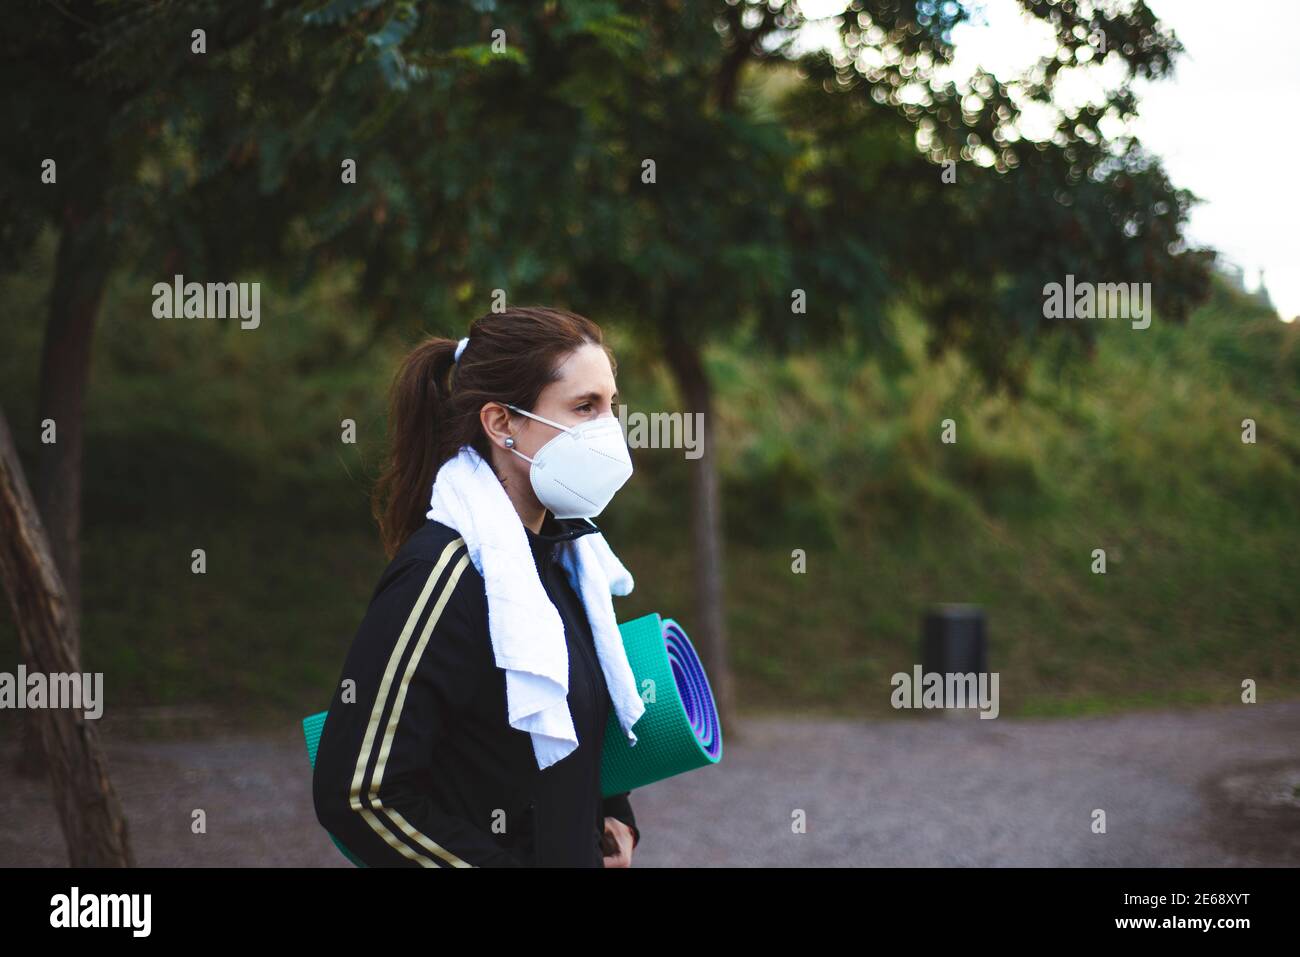 Girl in the park while wearing a facemask - new normal amidst COVID19 pandemic Stock Photo